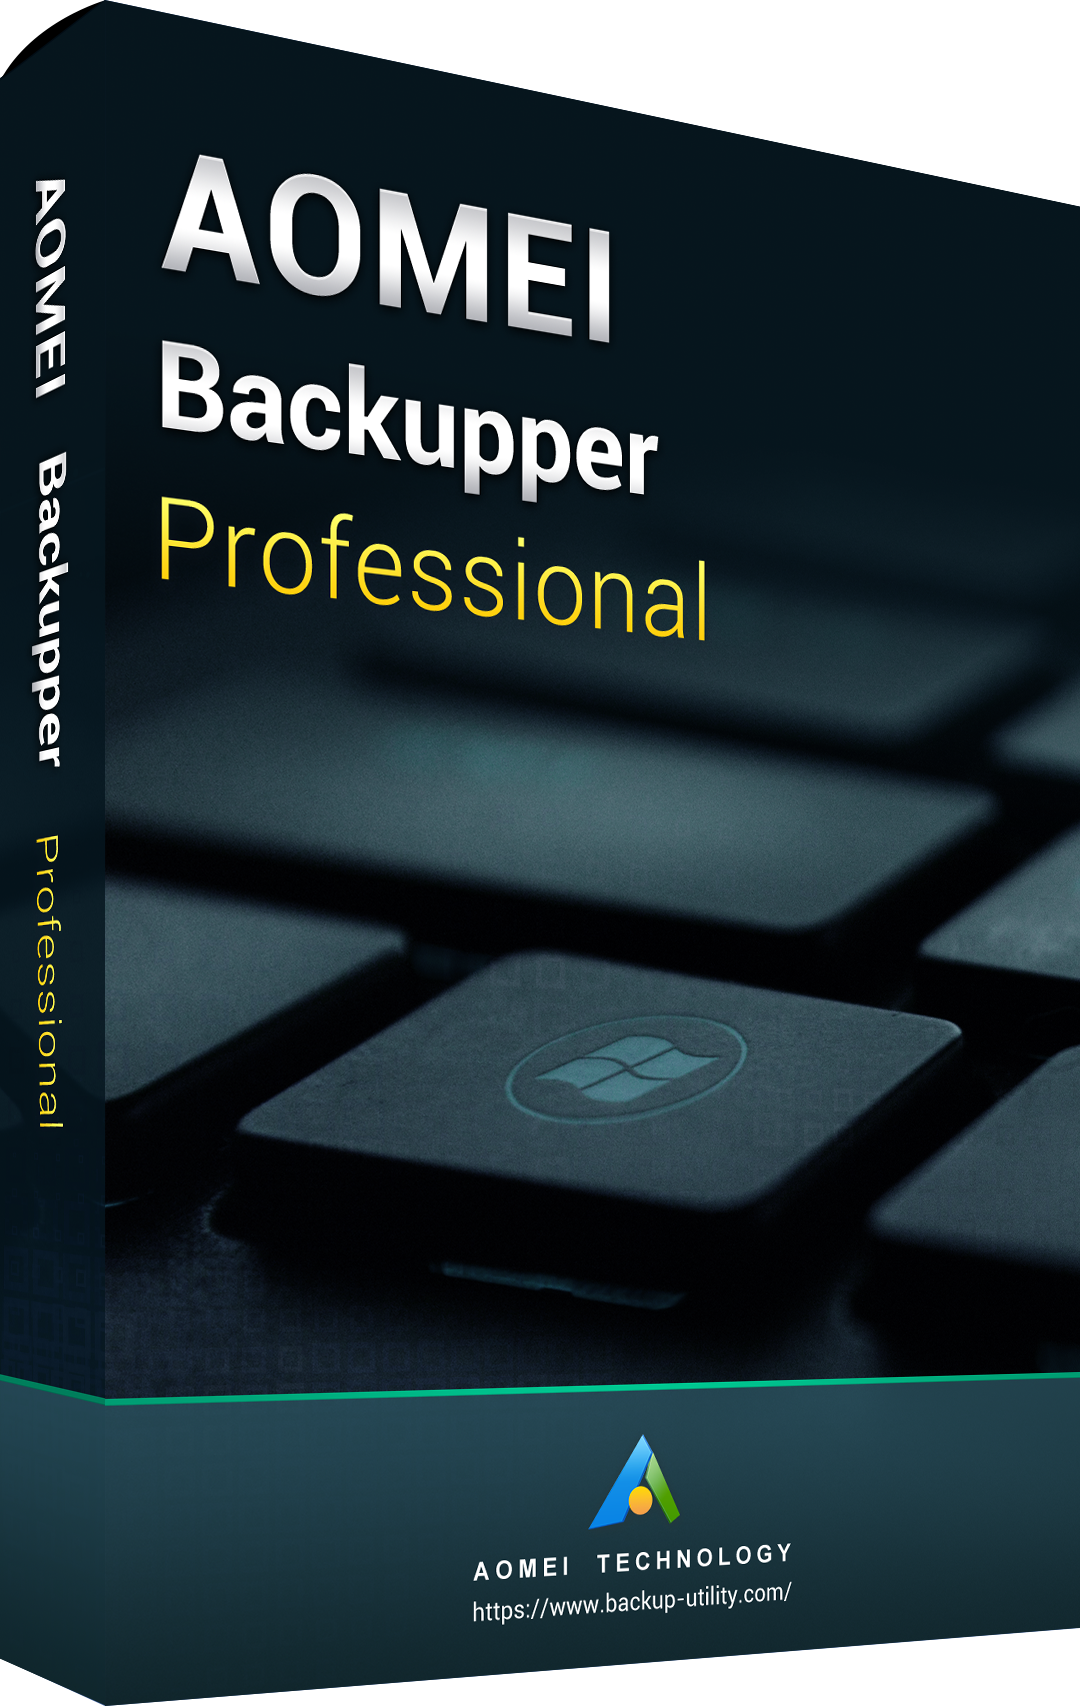 Download Link: <a href="http://www2.aomeisoftware.com/download/adb/full/AOMEIBackupperSetup.exe">http://www2.aomeisoftware.com/download/adb/full/AOMEIBackupperSetup.exe</a><br>It's in stock now, welcome to order in SCDKey. One license code could reigster on 2 PCs.